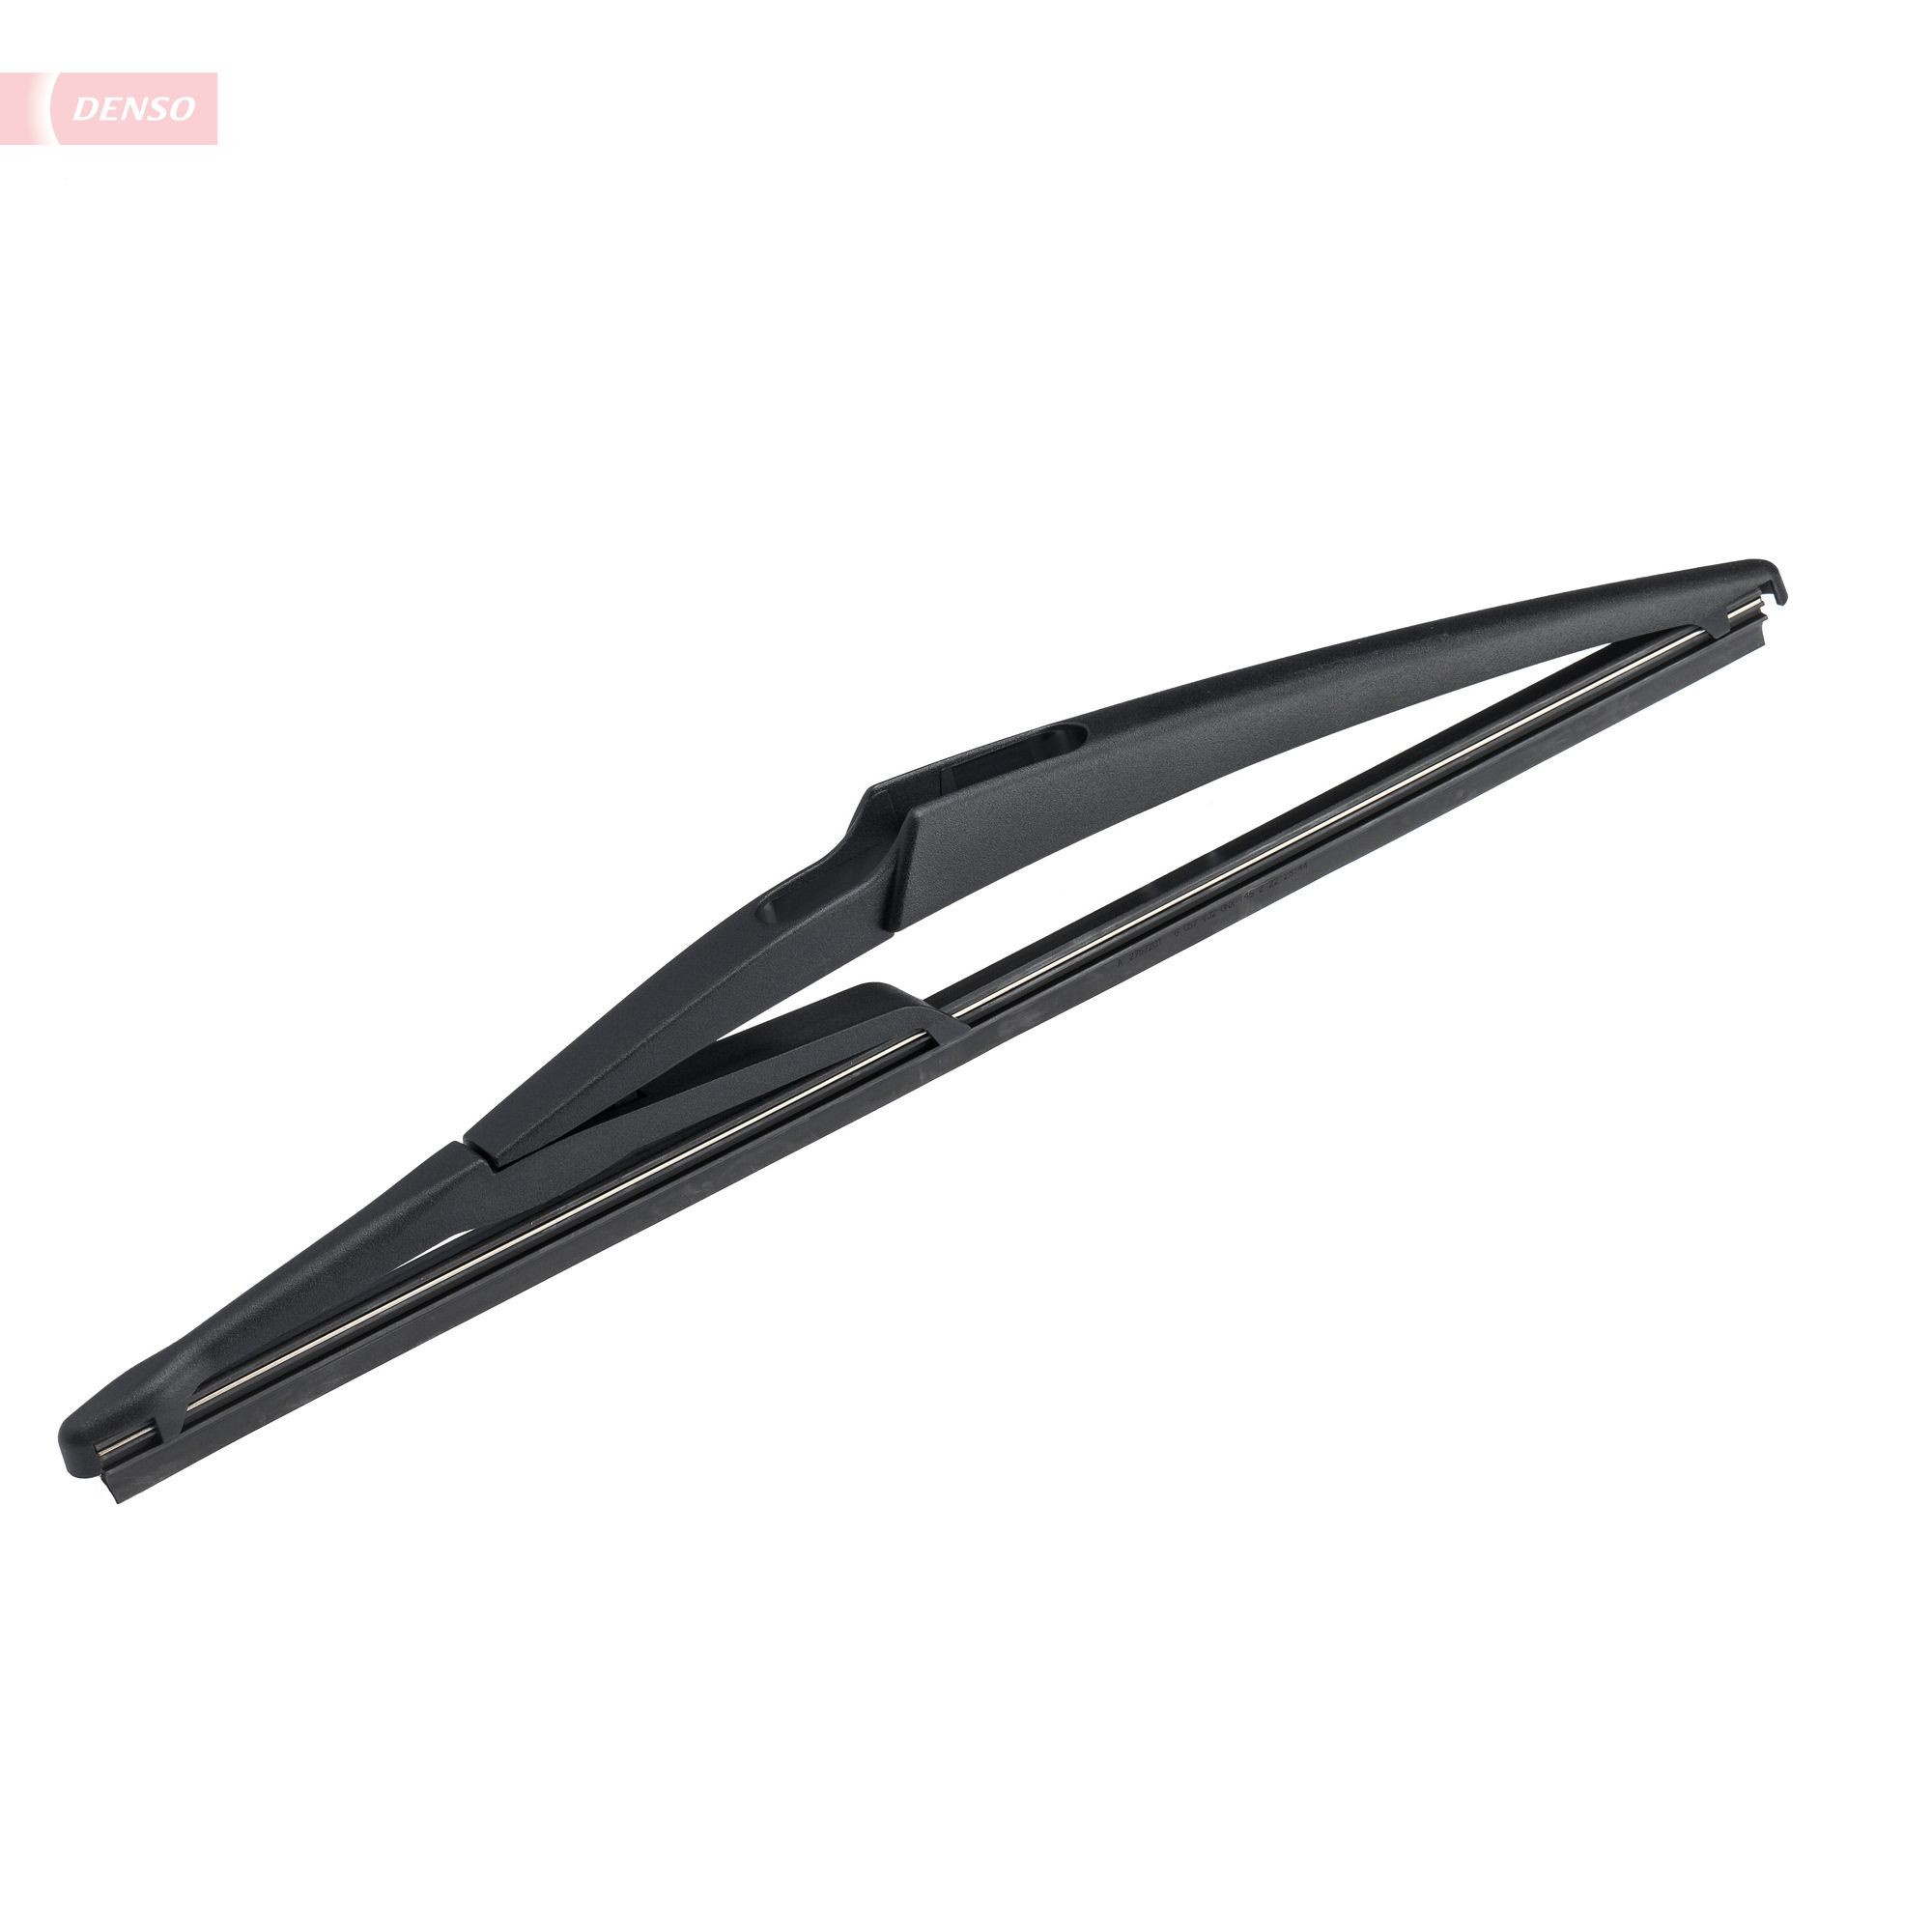 Original DENSO Windshield wipers DRD-004 for MERCEDES-BENZ E-Class